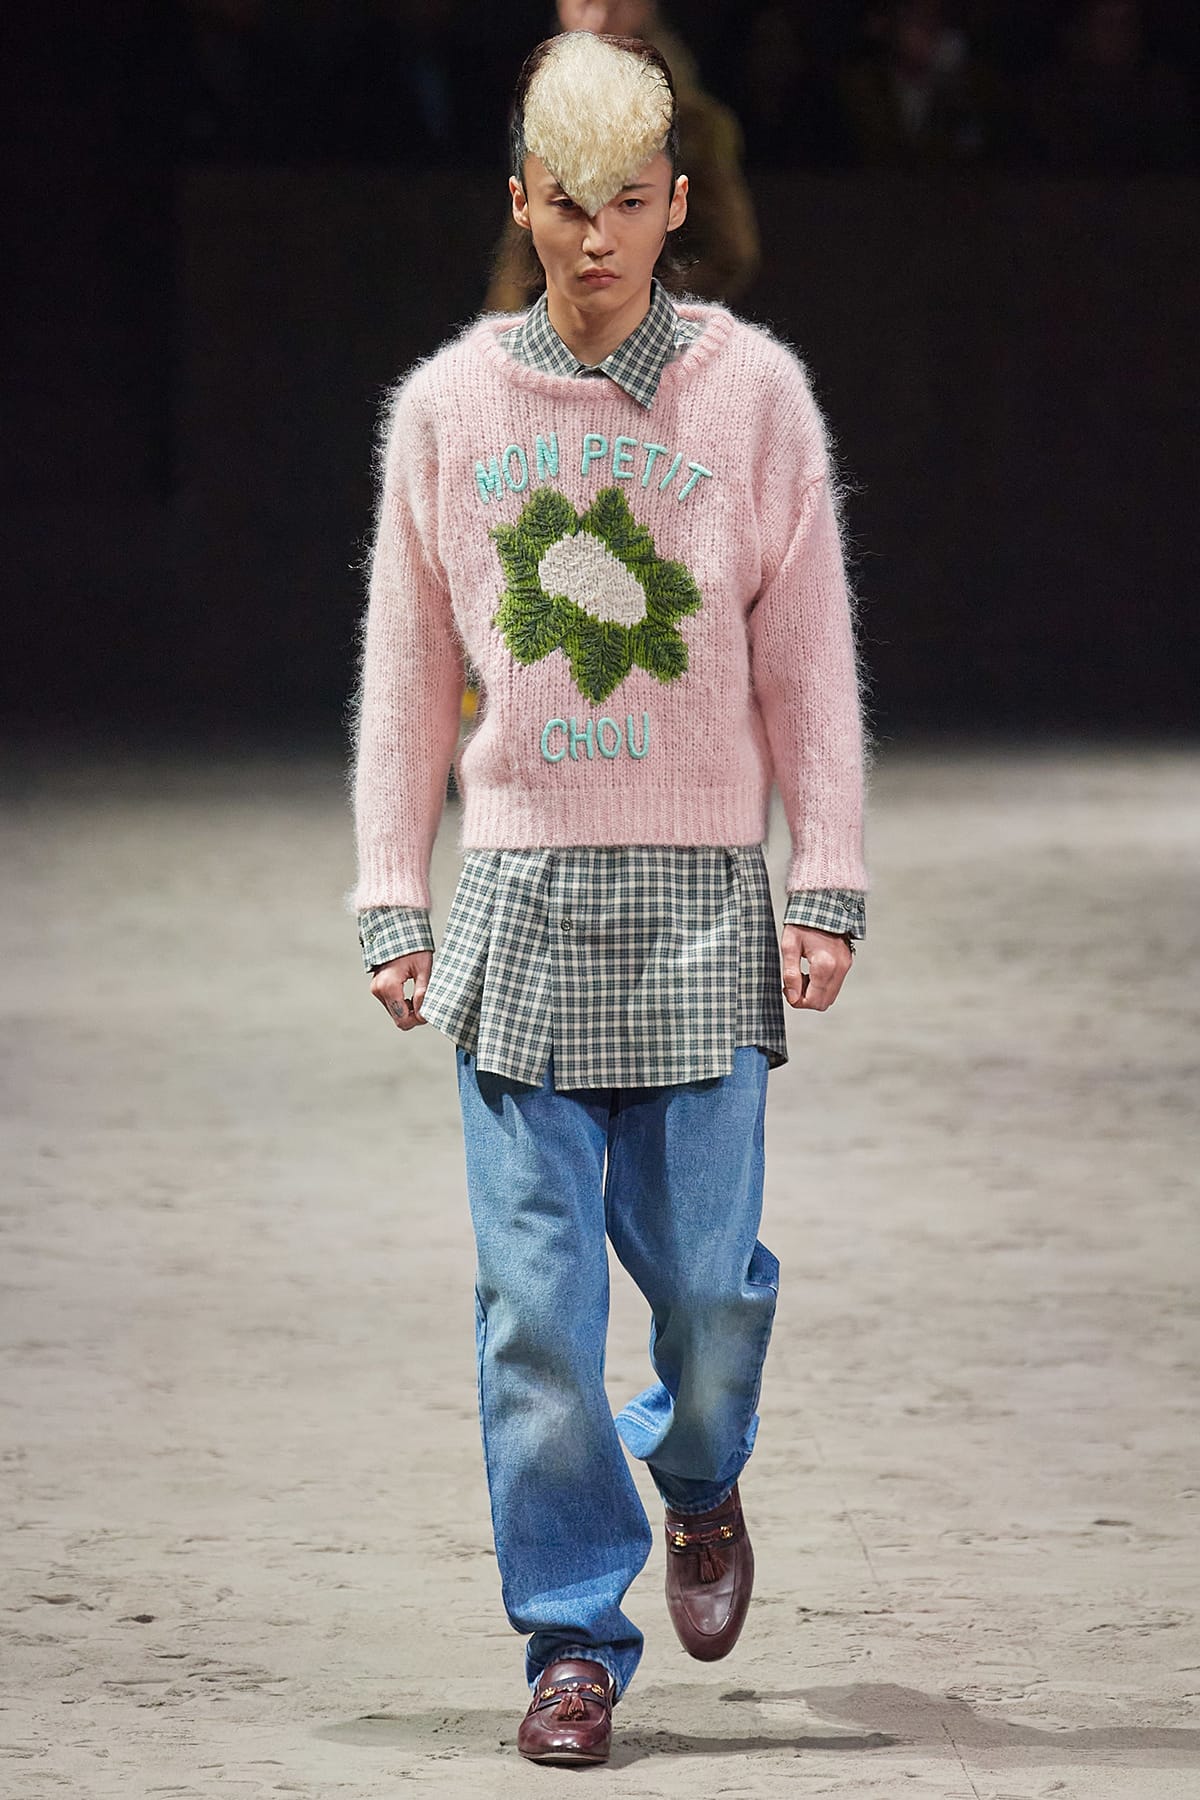 Every Look From Gucci's FW20 Men's 